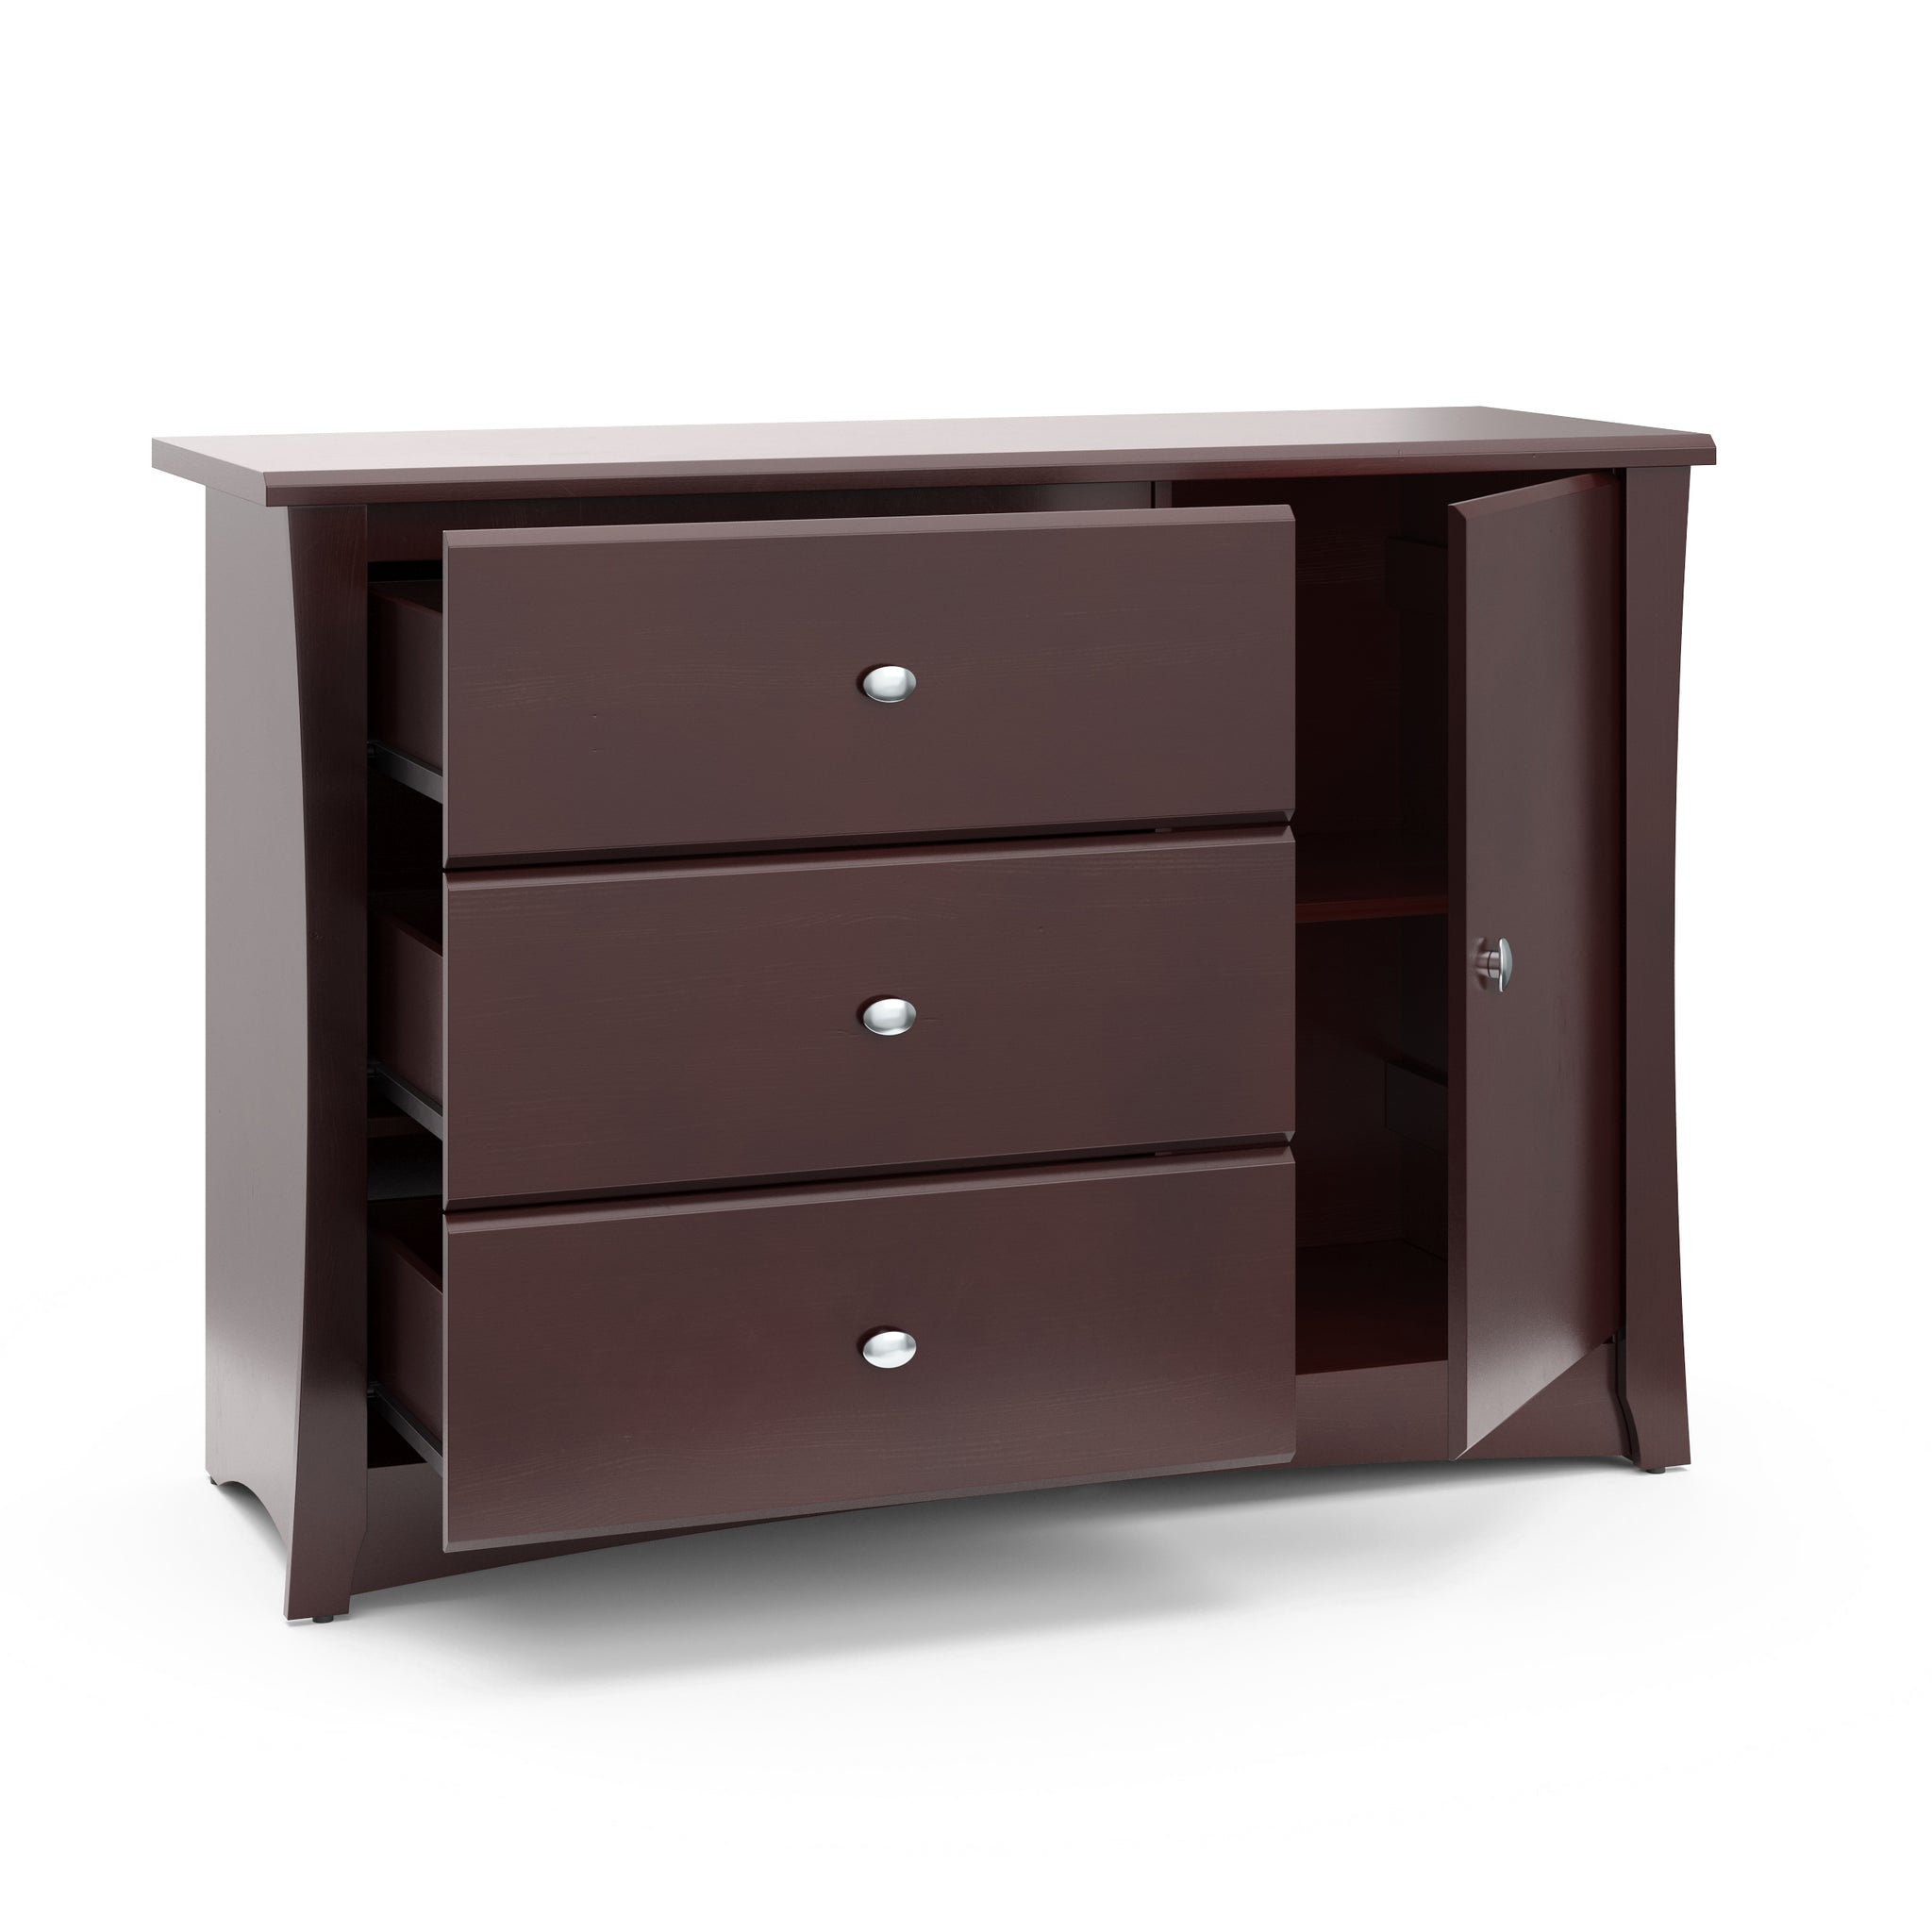 Side view of espresso 3 drawer chest with 3 open drawers